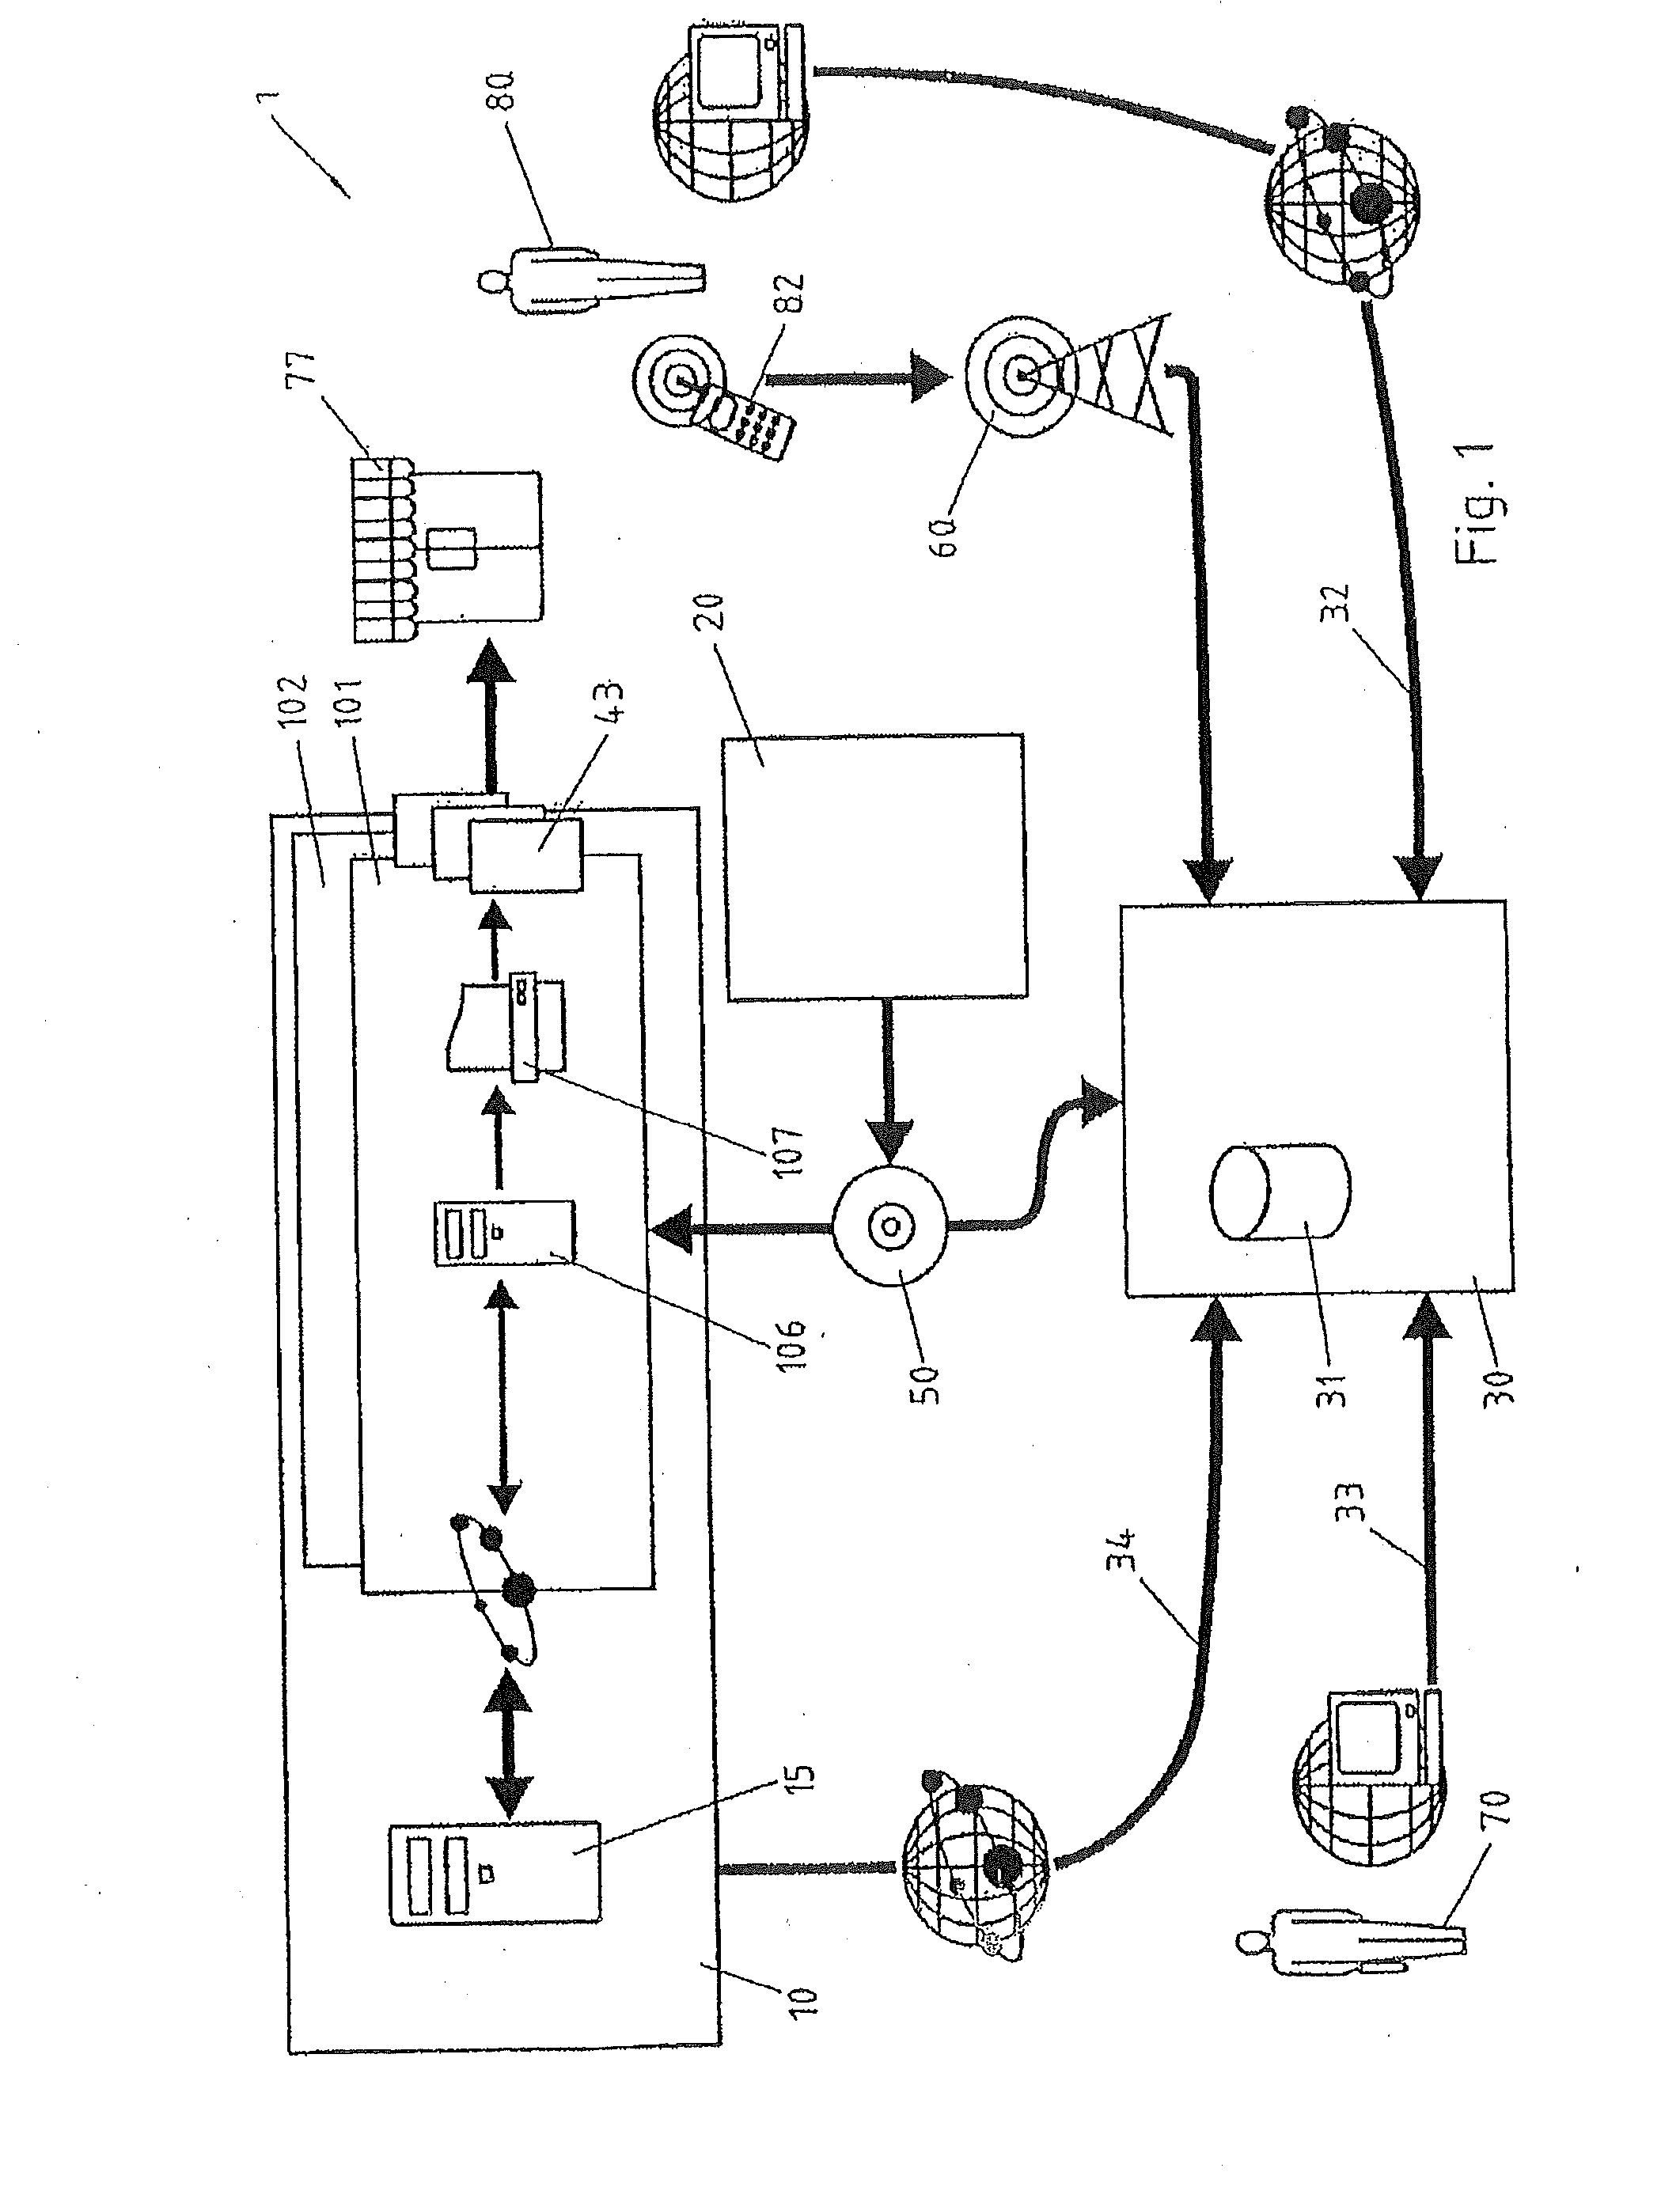 Methods and systems for making, tracking and authentication of products